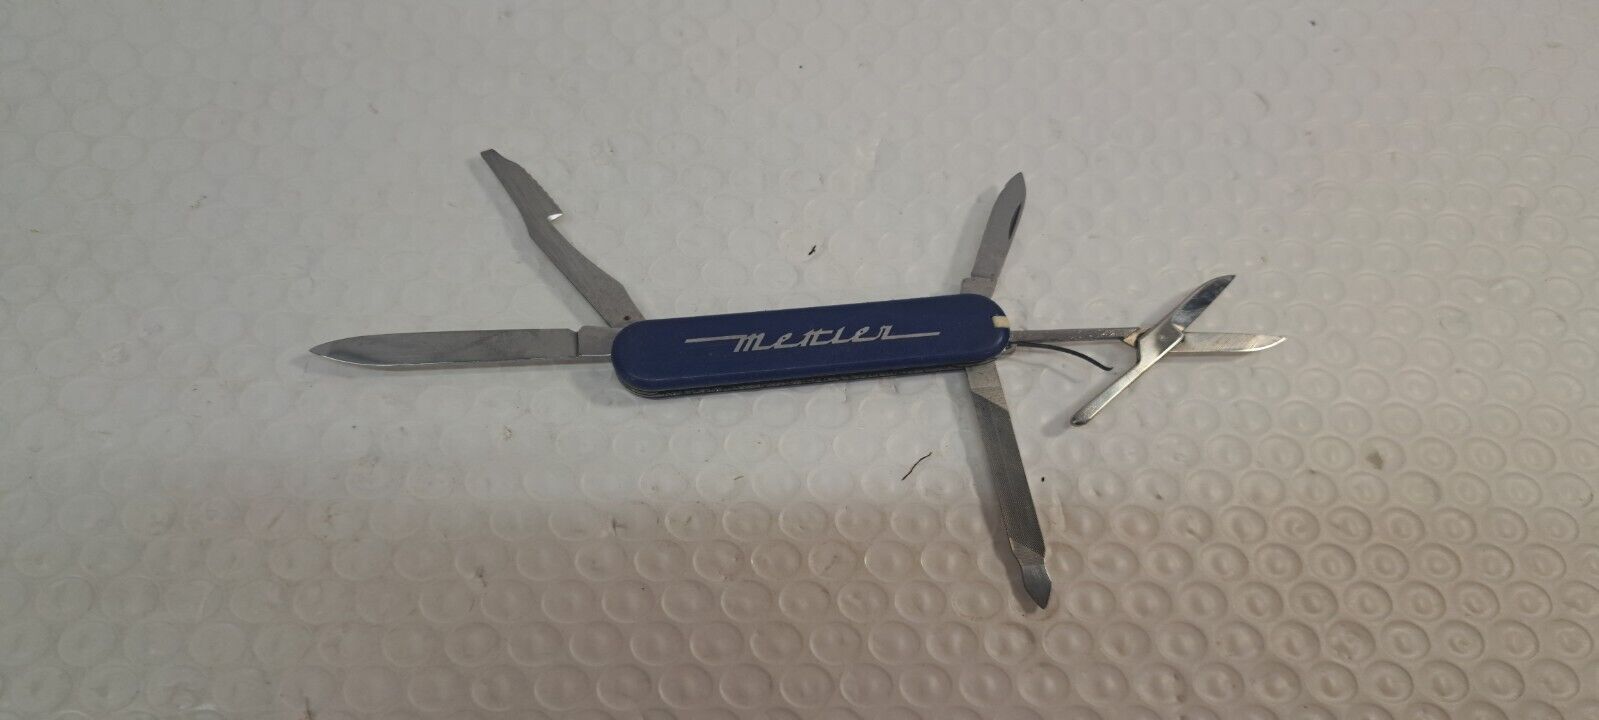 VICTORINOX EXECUTIVE blue  SWISS ARMY KNIFE--See Pics Damage to scissors spring